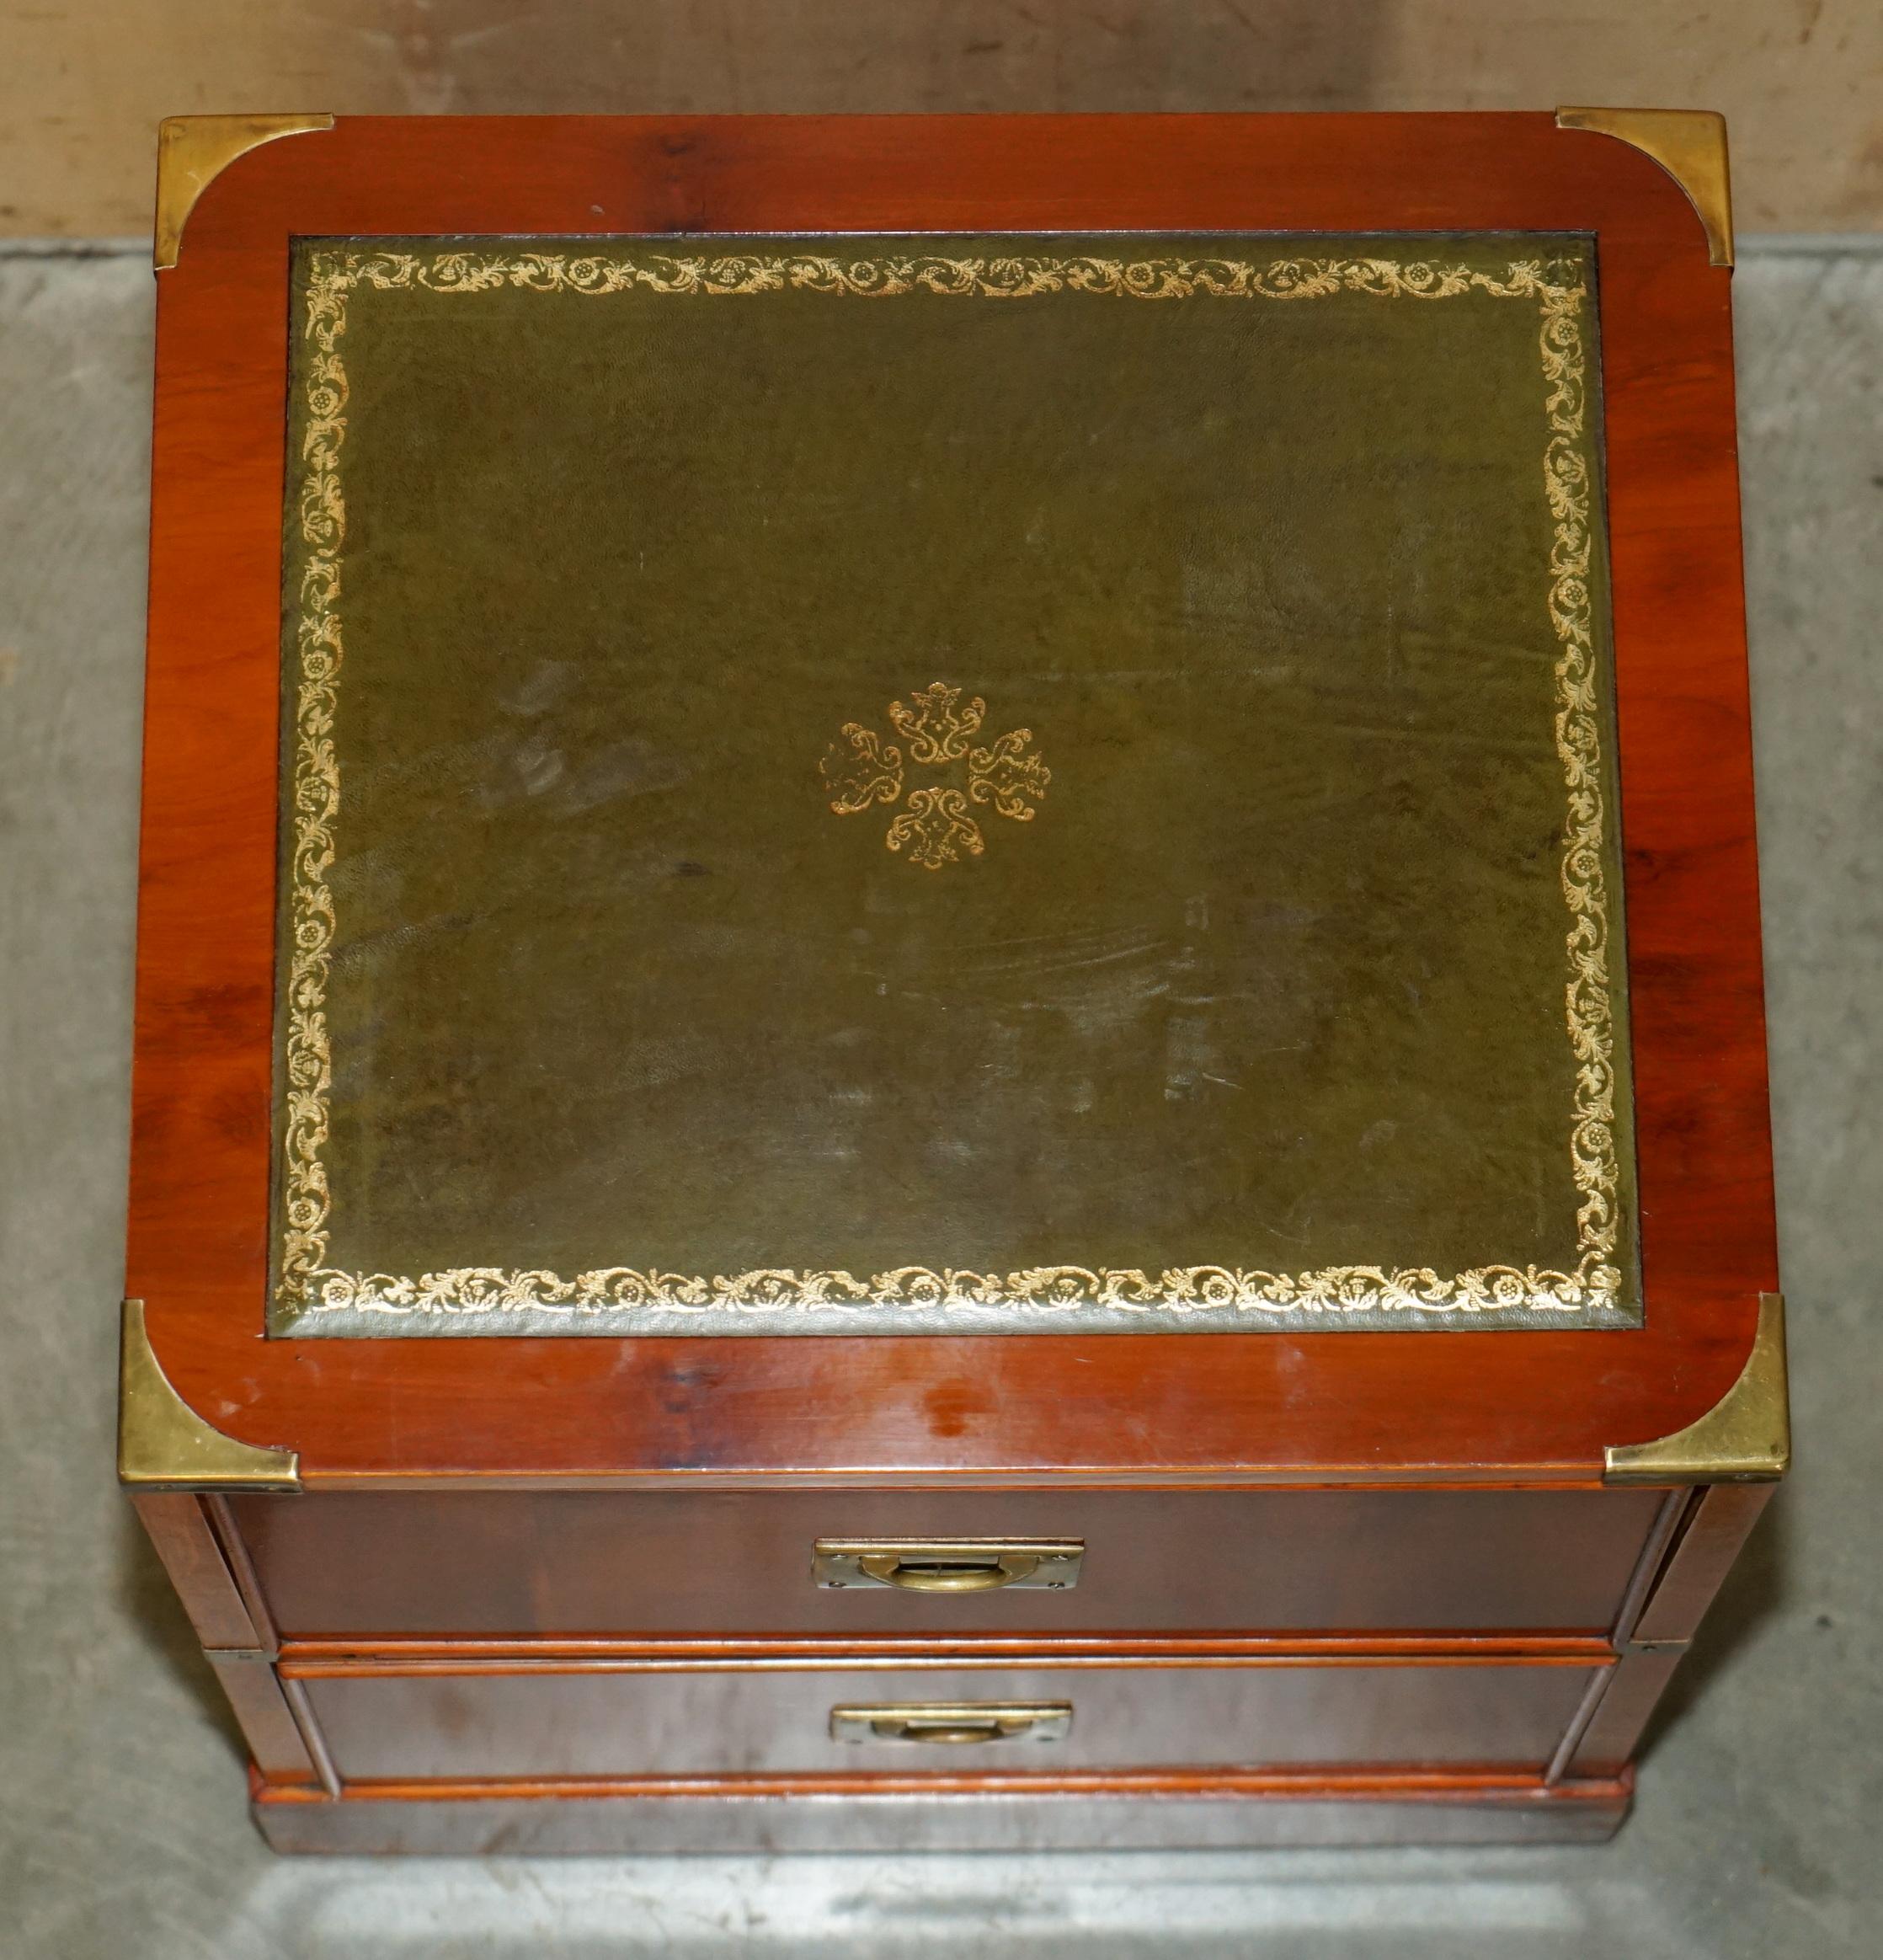 LOVELY PAiR OF BURR YEW WOOD GREEN LEATHER MILITARY CAMPAIGN NIGHTSTAND DRAWERS im Angebot 3